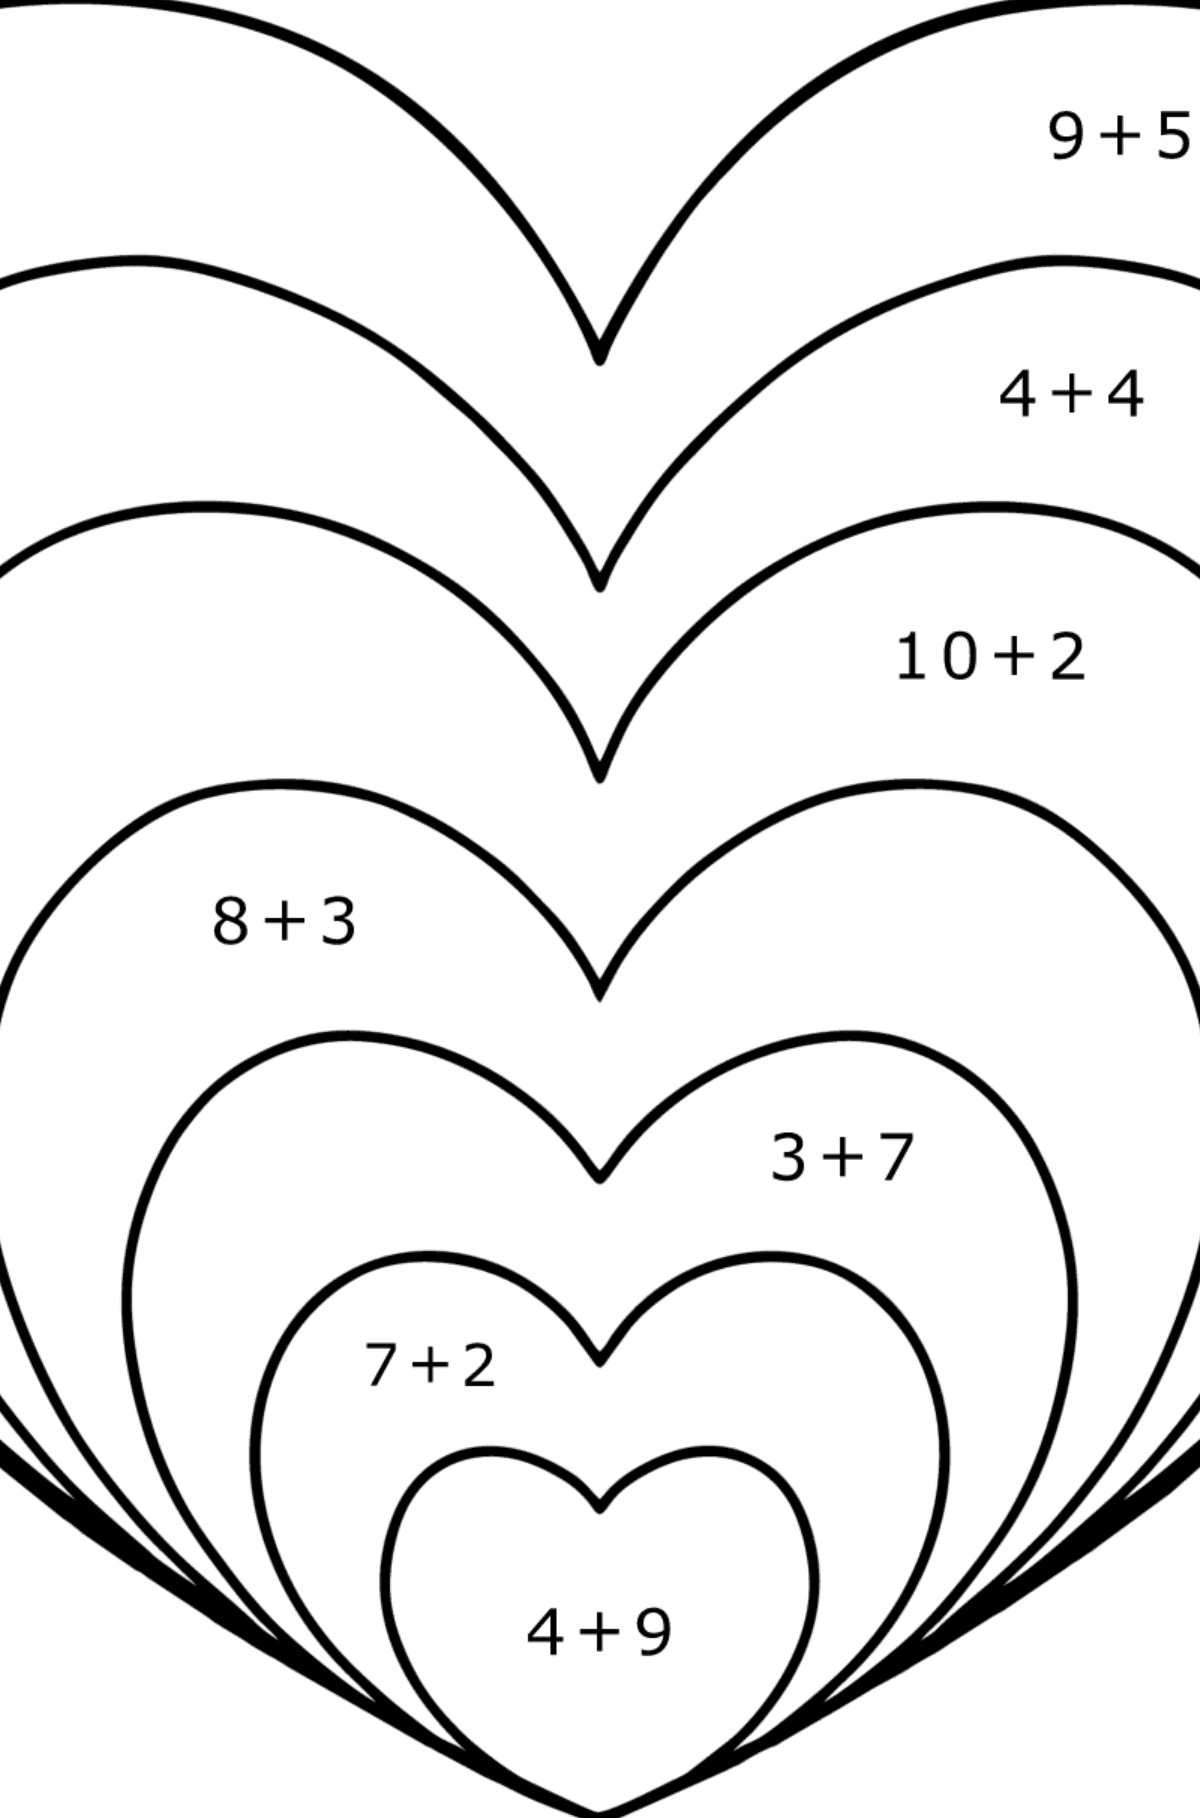 Simple Zen heart coloring page - Math Coloring - Addition for Kids